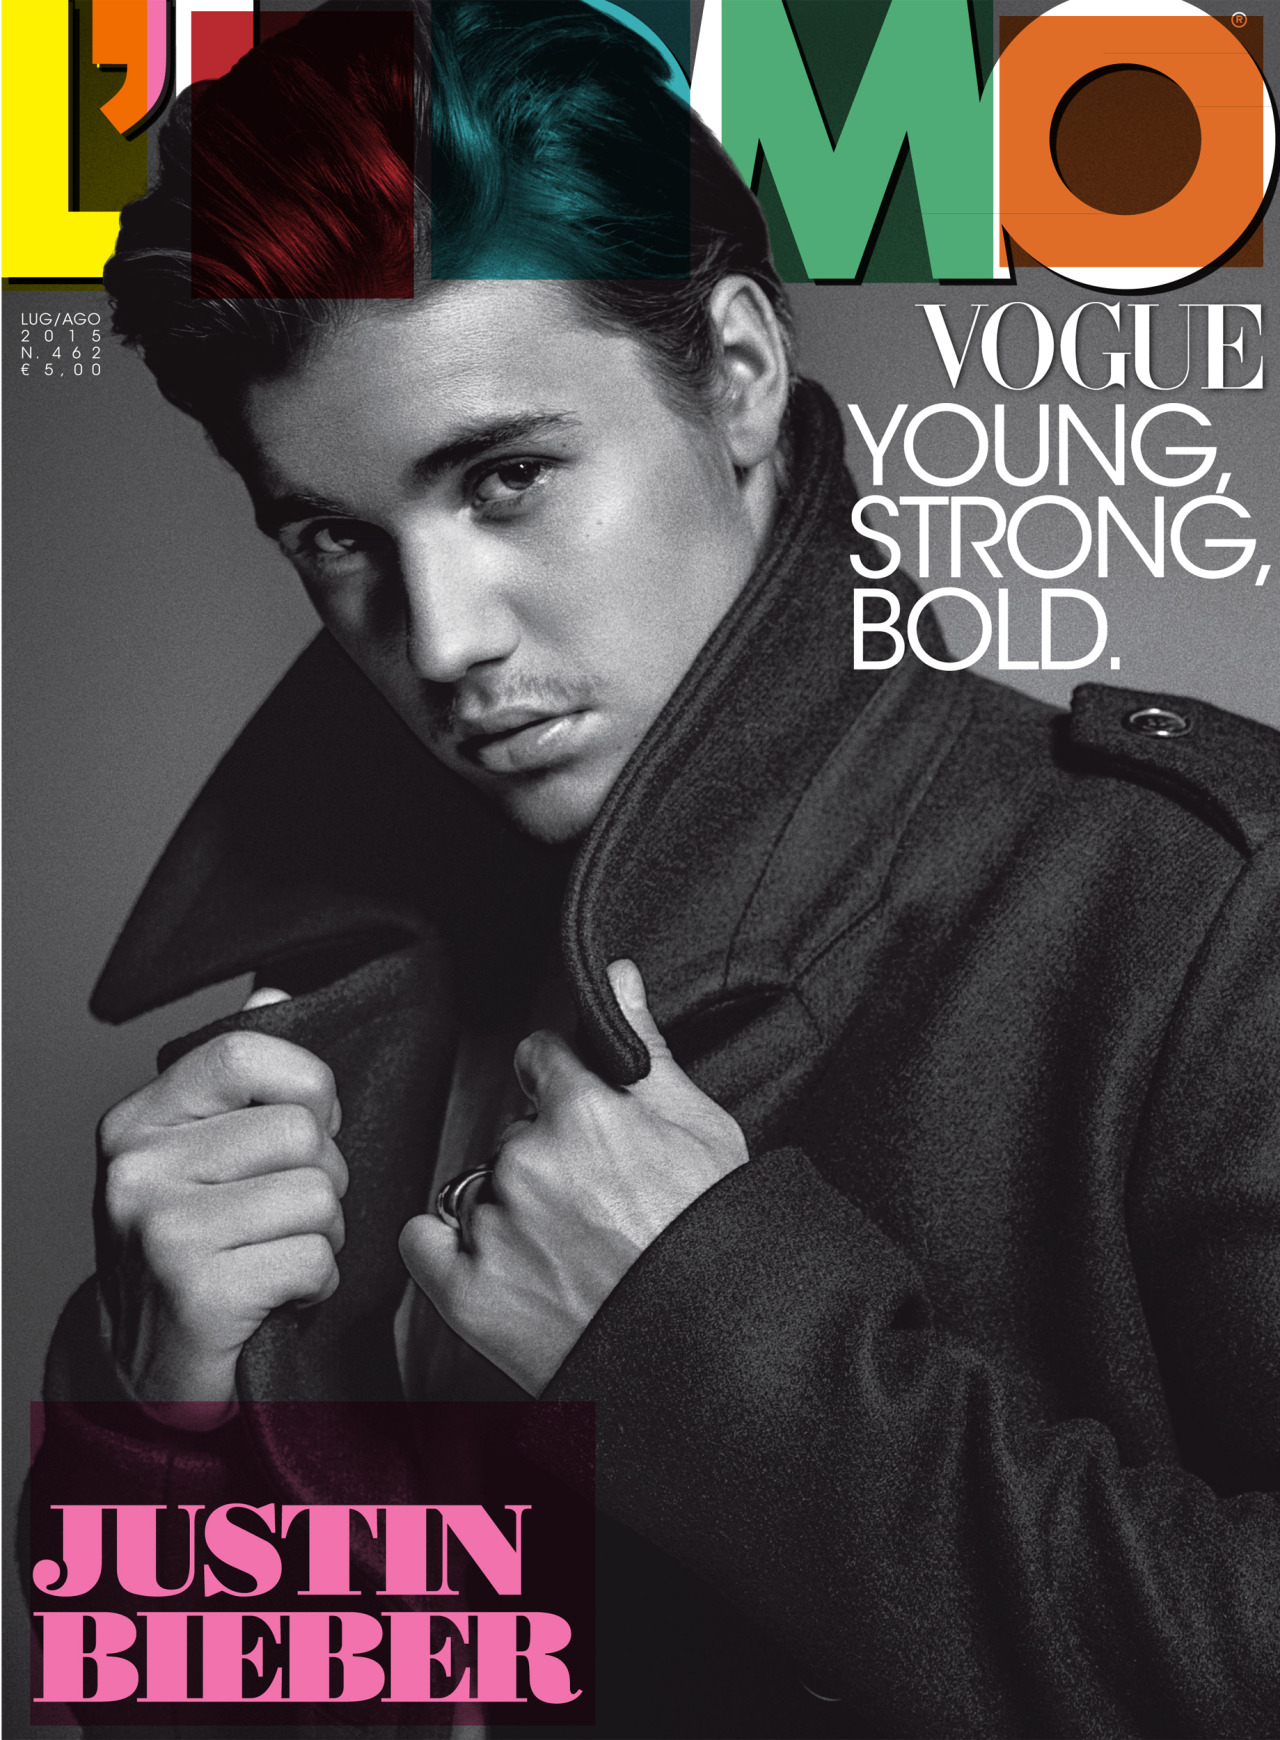 Justin Bieber LUomo Vogue July August 2015 Cover